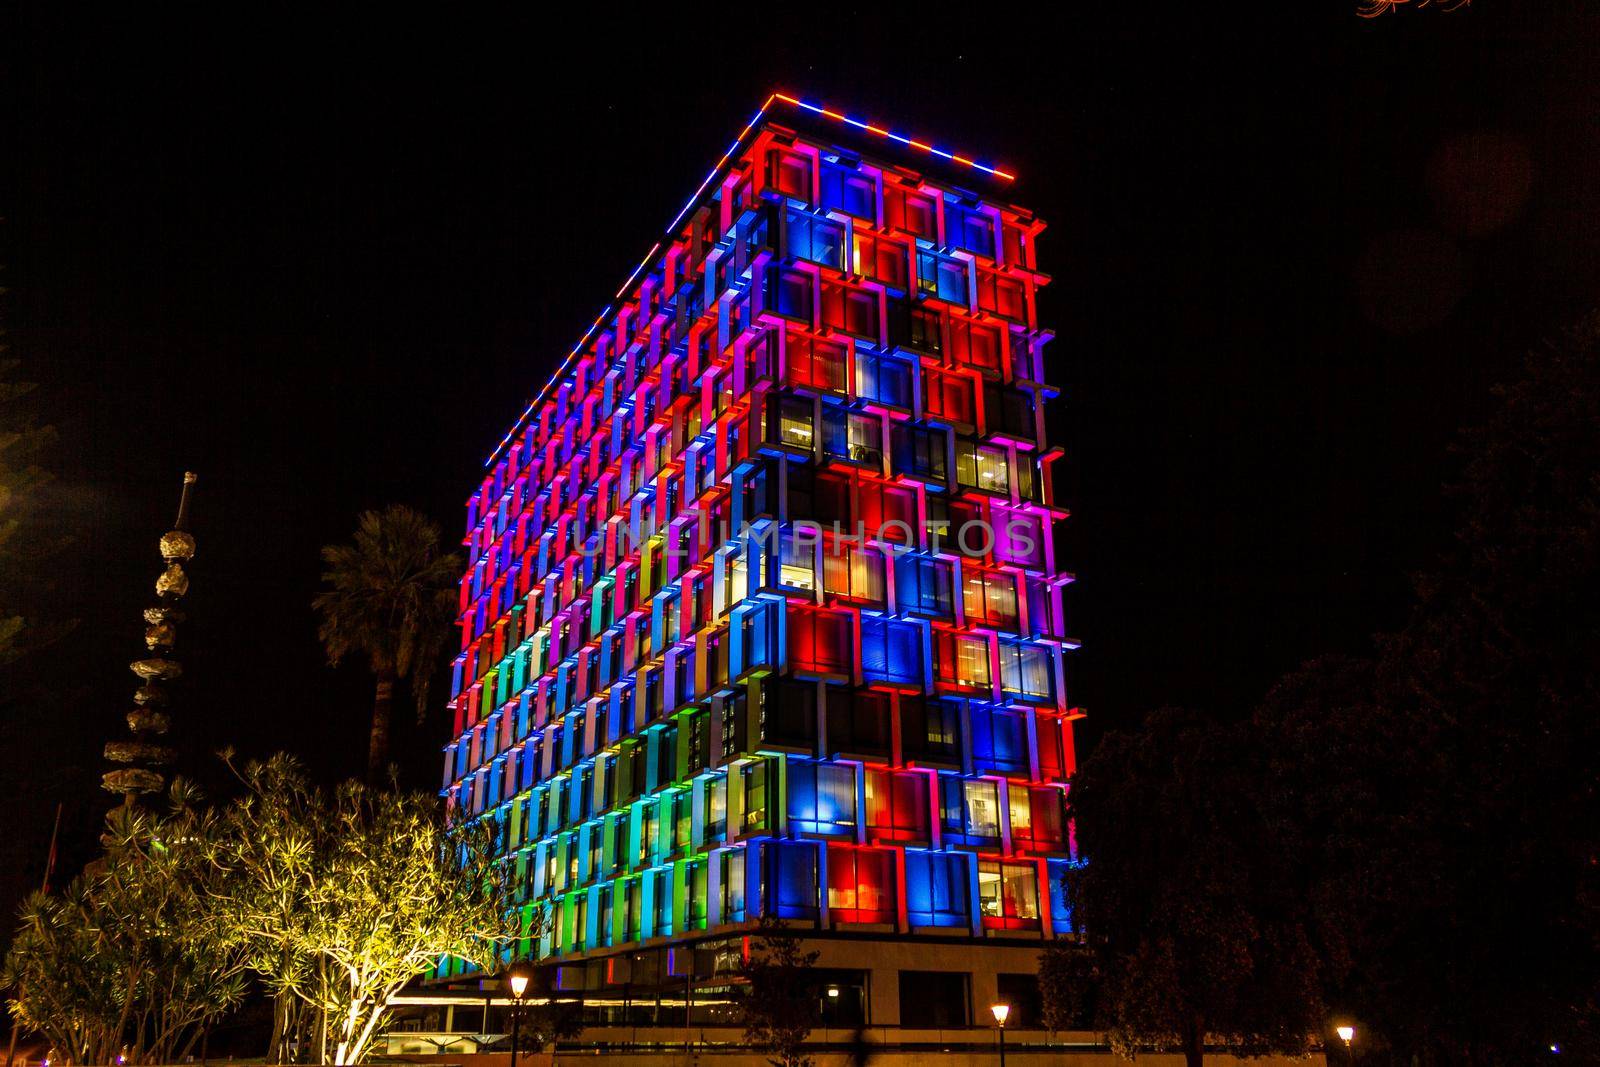 Perth, Aaustralia - March 19 : Colorful lighting on building for show people in night time at Hay street mall by bettercallcurry